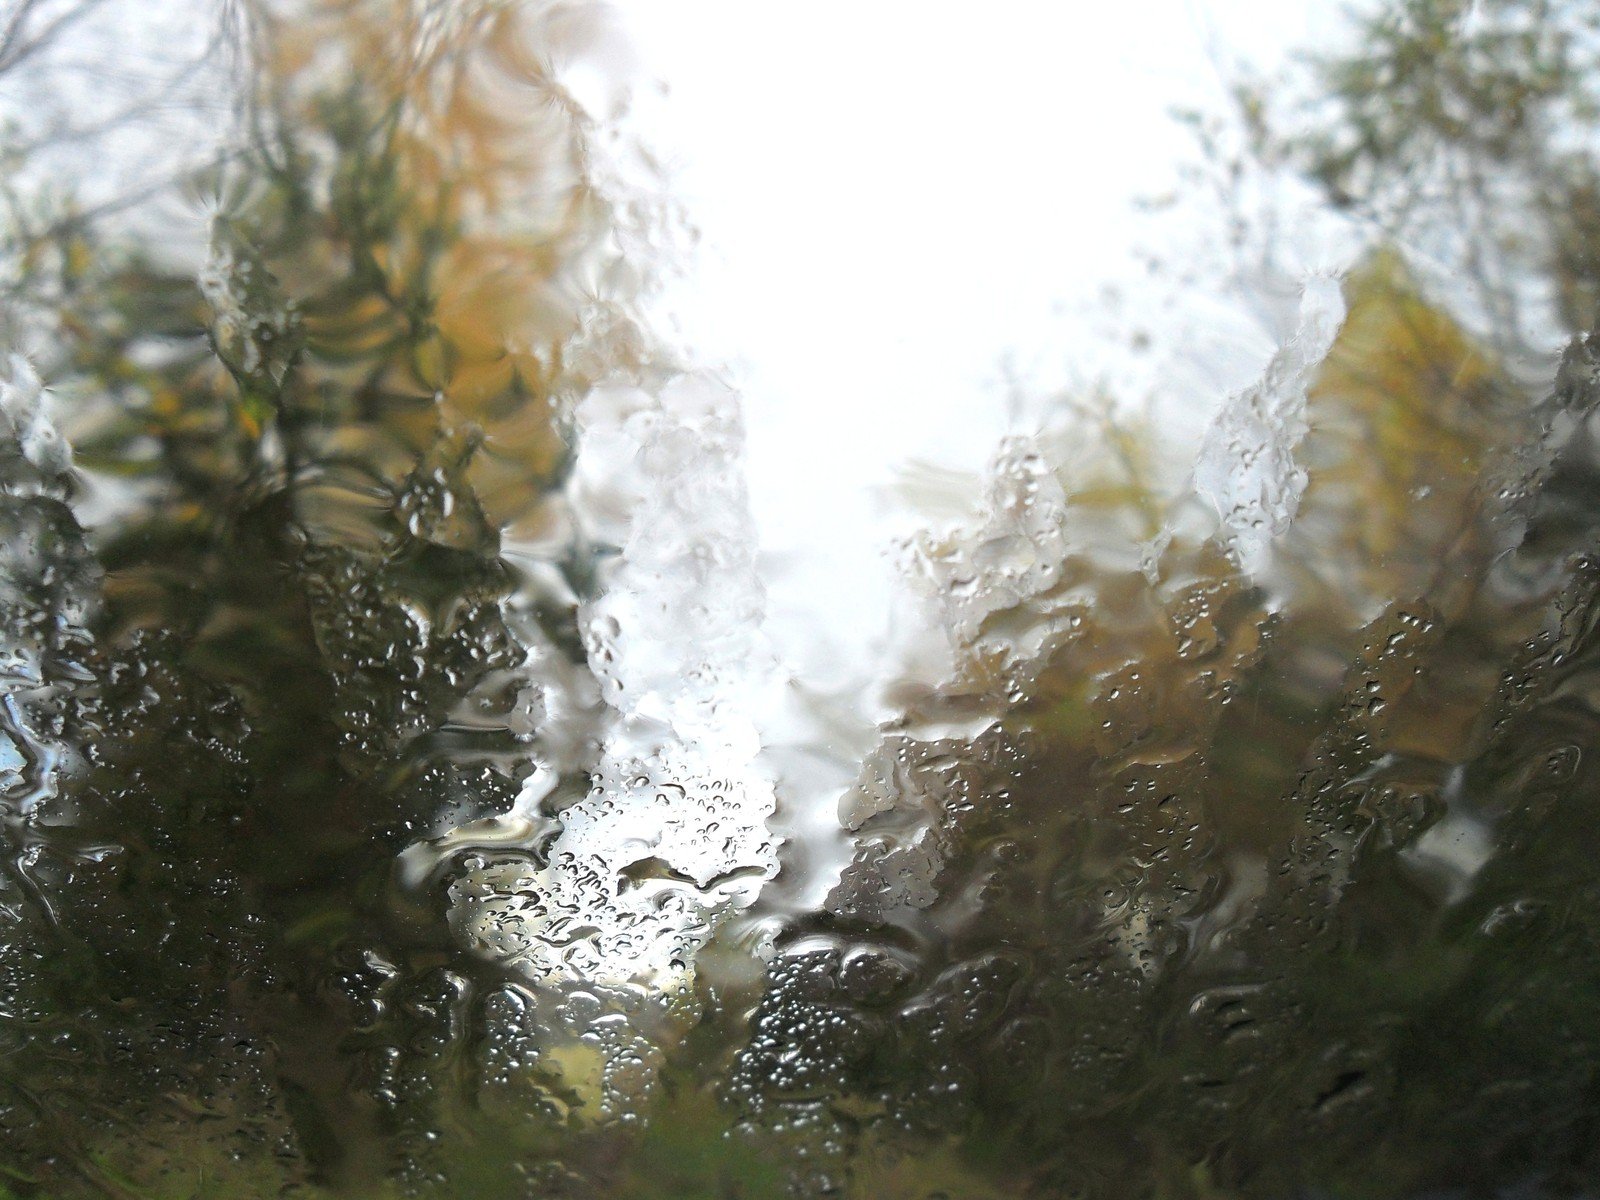 some trees that are outside on a rainy day